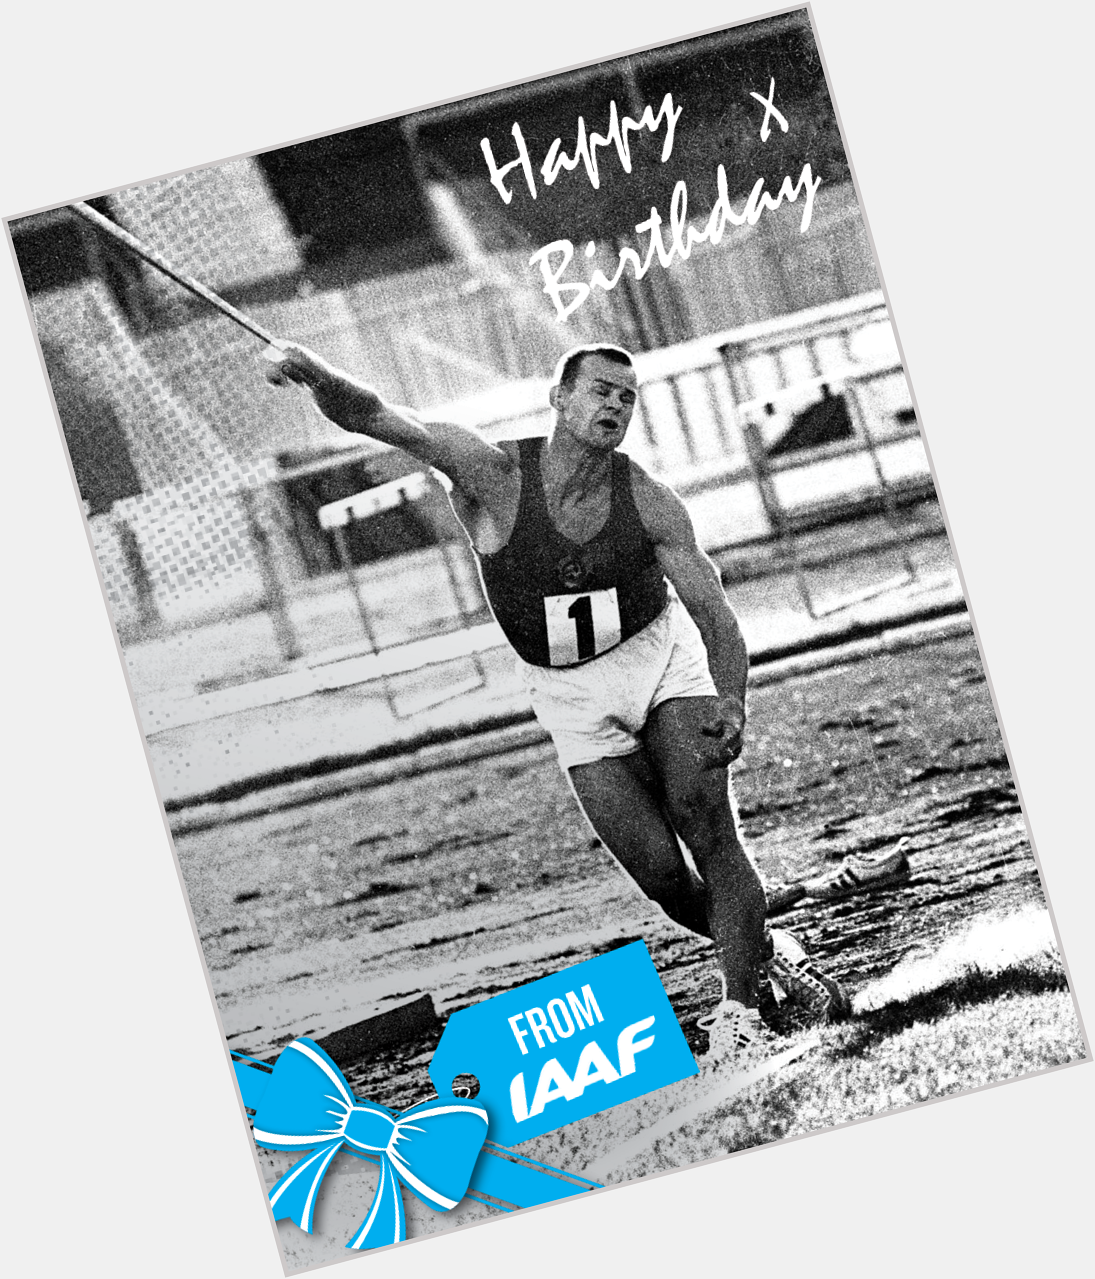 Happy birthday to Olympic gold, silver and bronze medallist and former javelin world record holder Janis Lusis! 